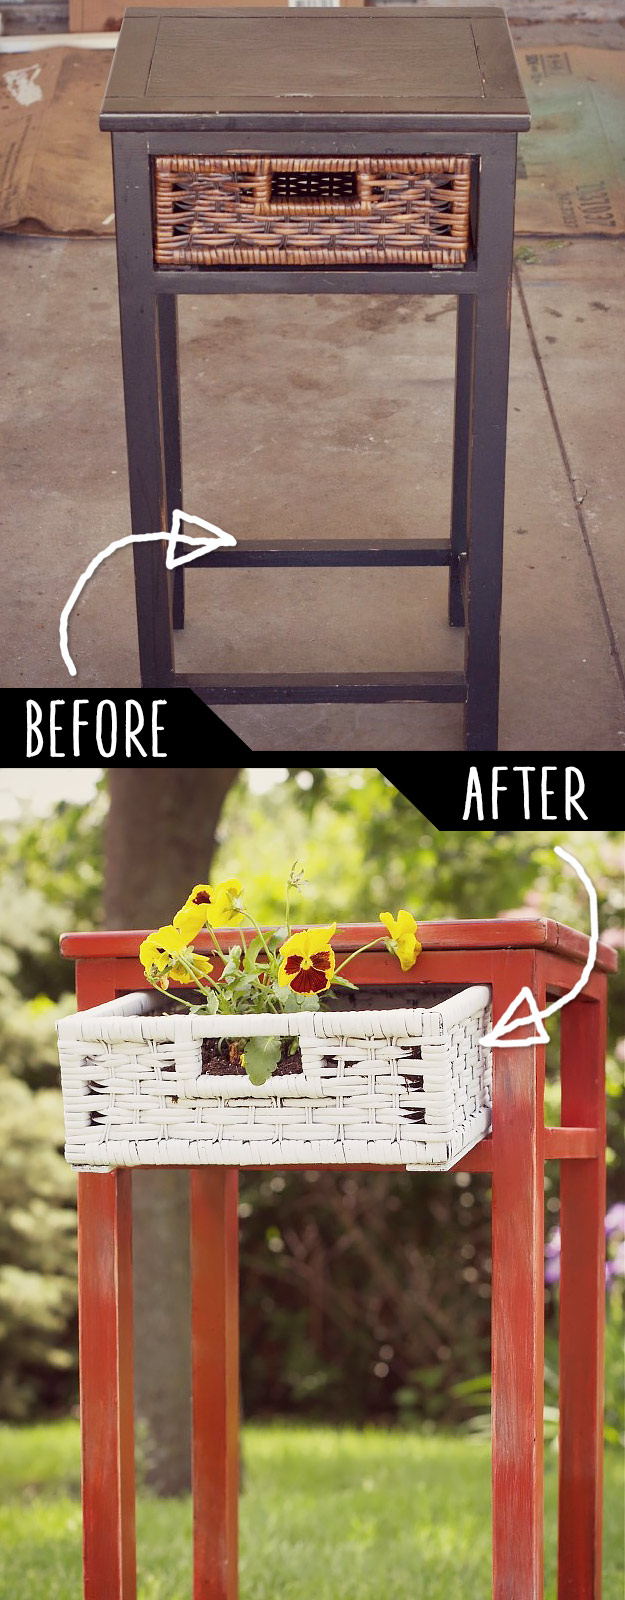 19 DIY Idea To Play With Old Furniture 1